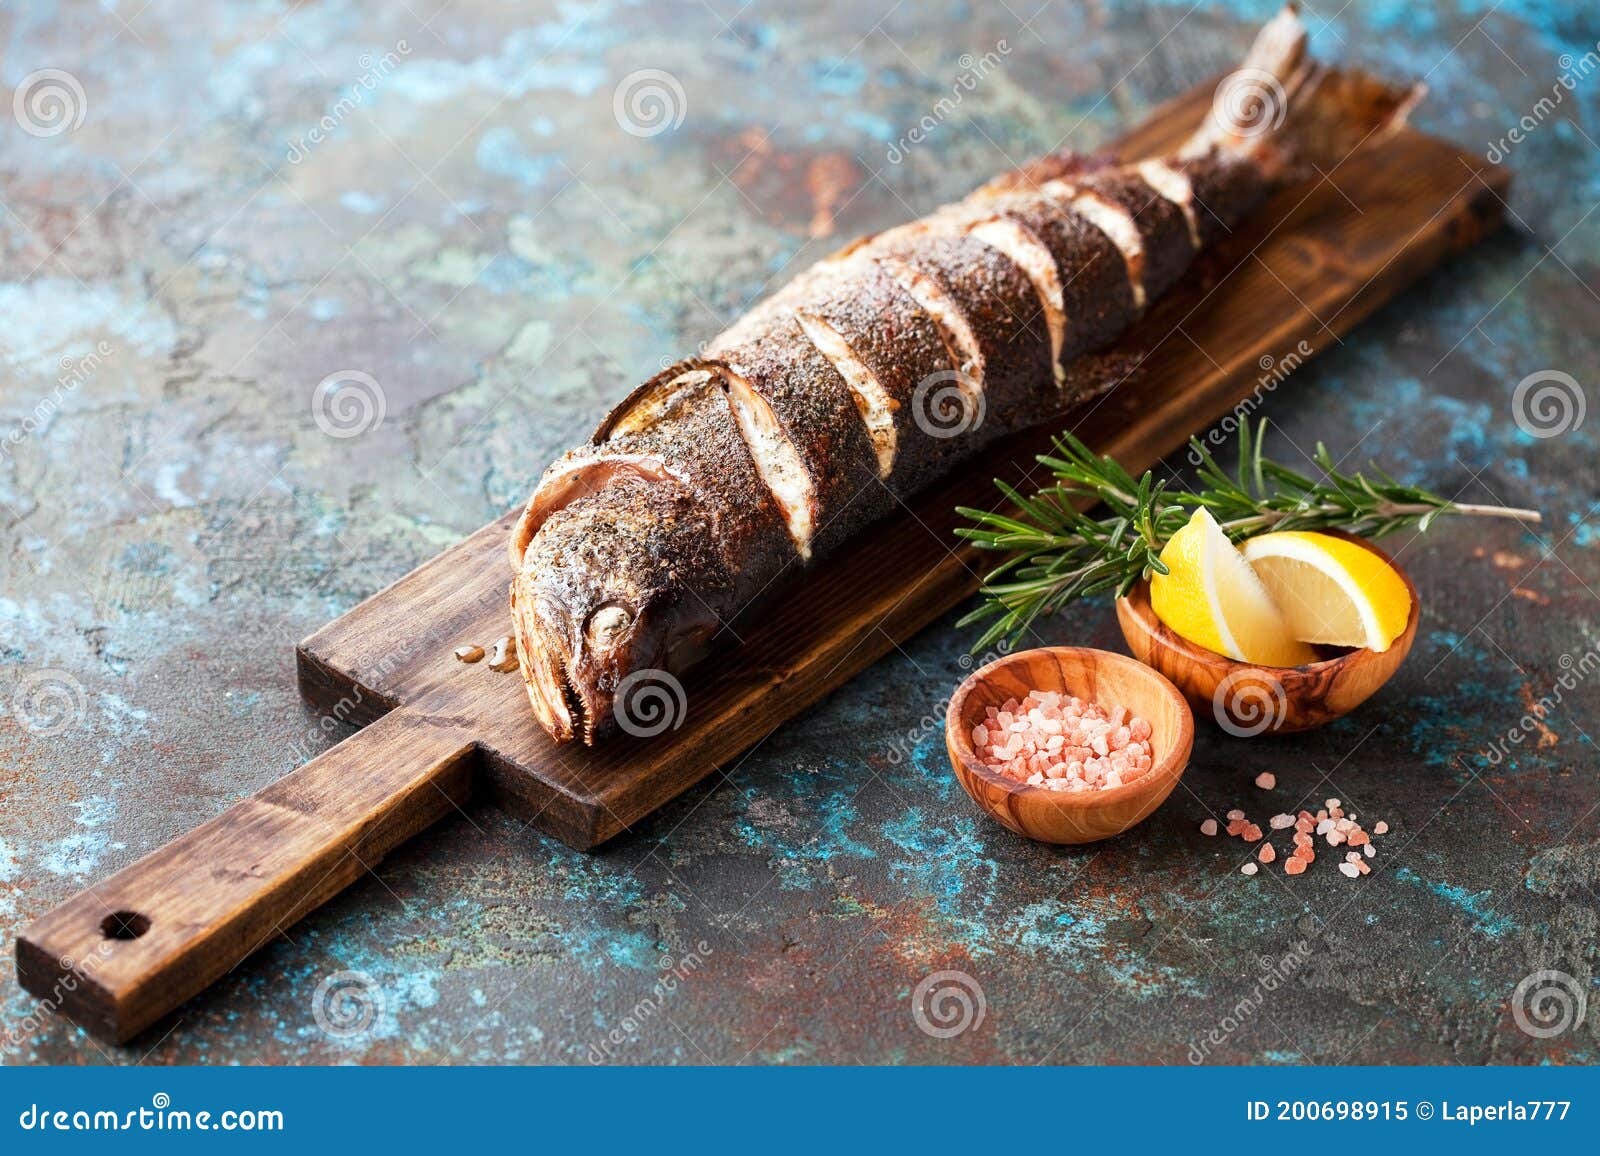 grilled whole humpback salmon fish with lemon on a wooden cutting board